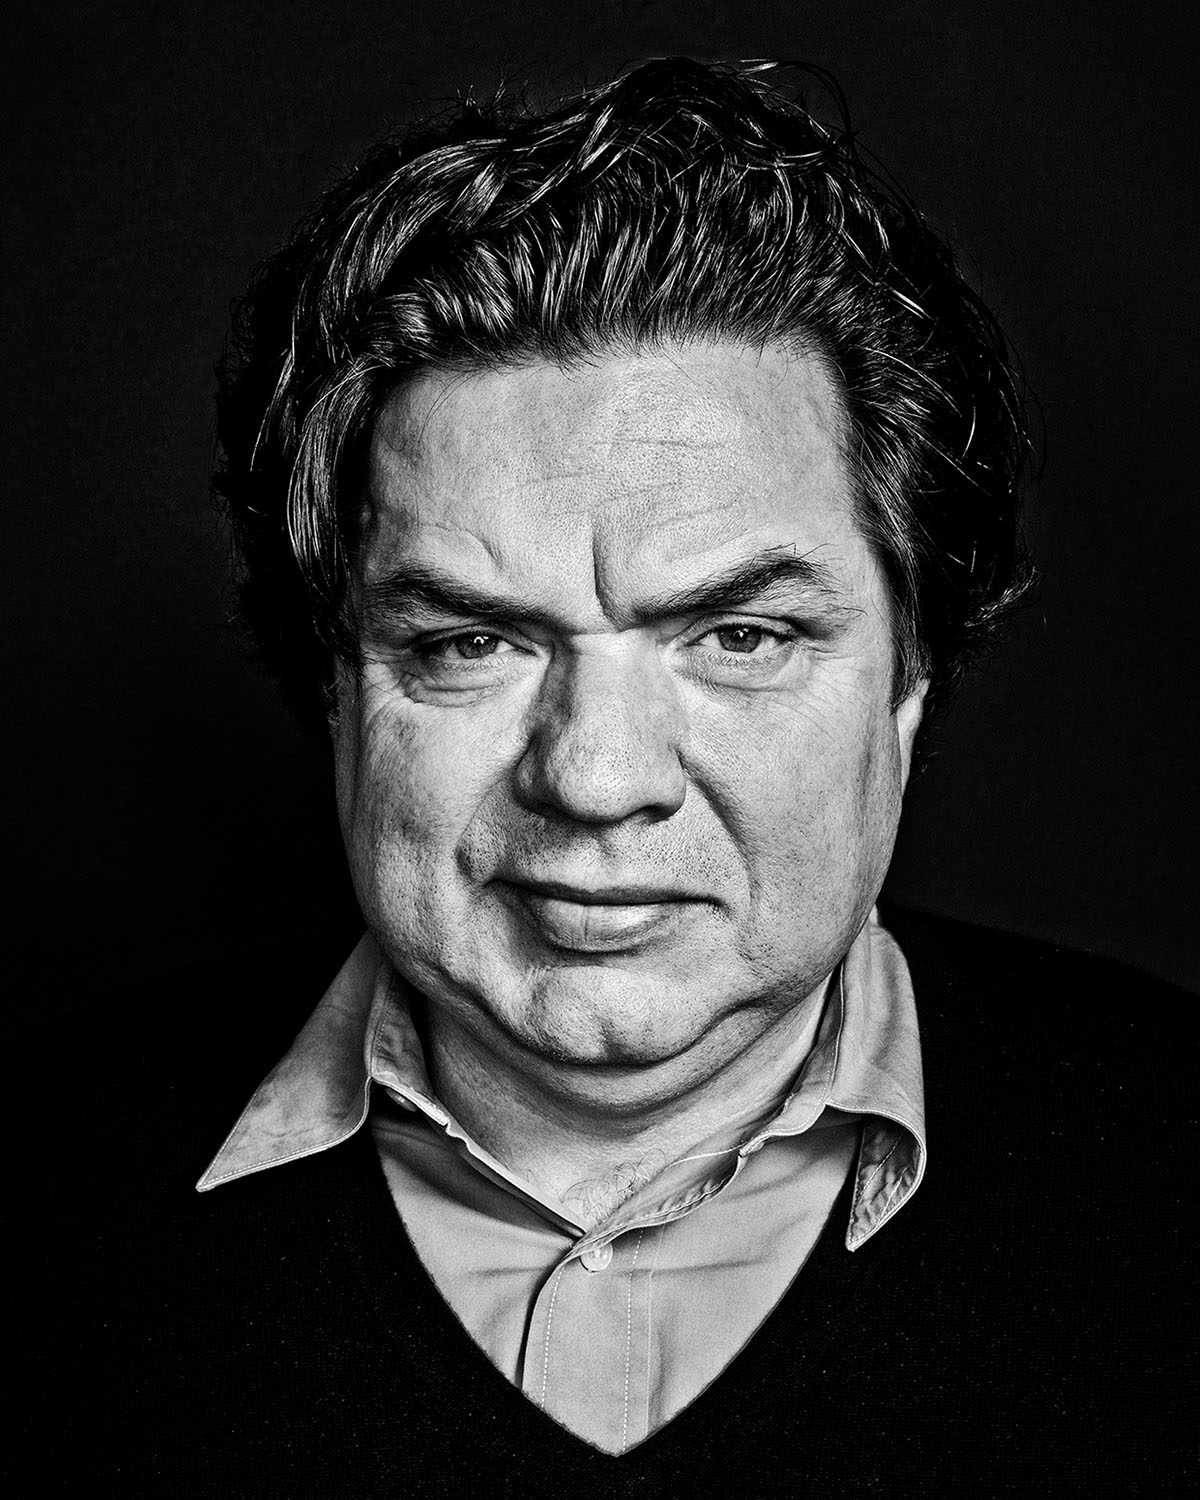 Miami photographer Brian Smith awarded People Photographer of the Year for portraits of actors including Oliver Platt ... - BrianSmith-Oliver-Platt